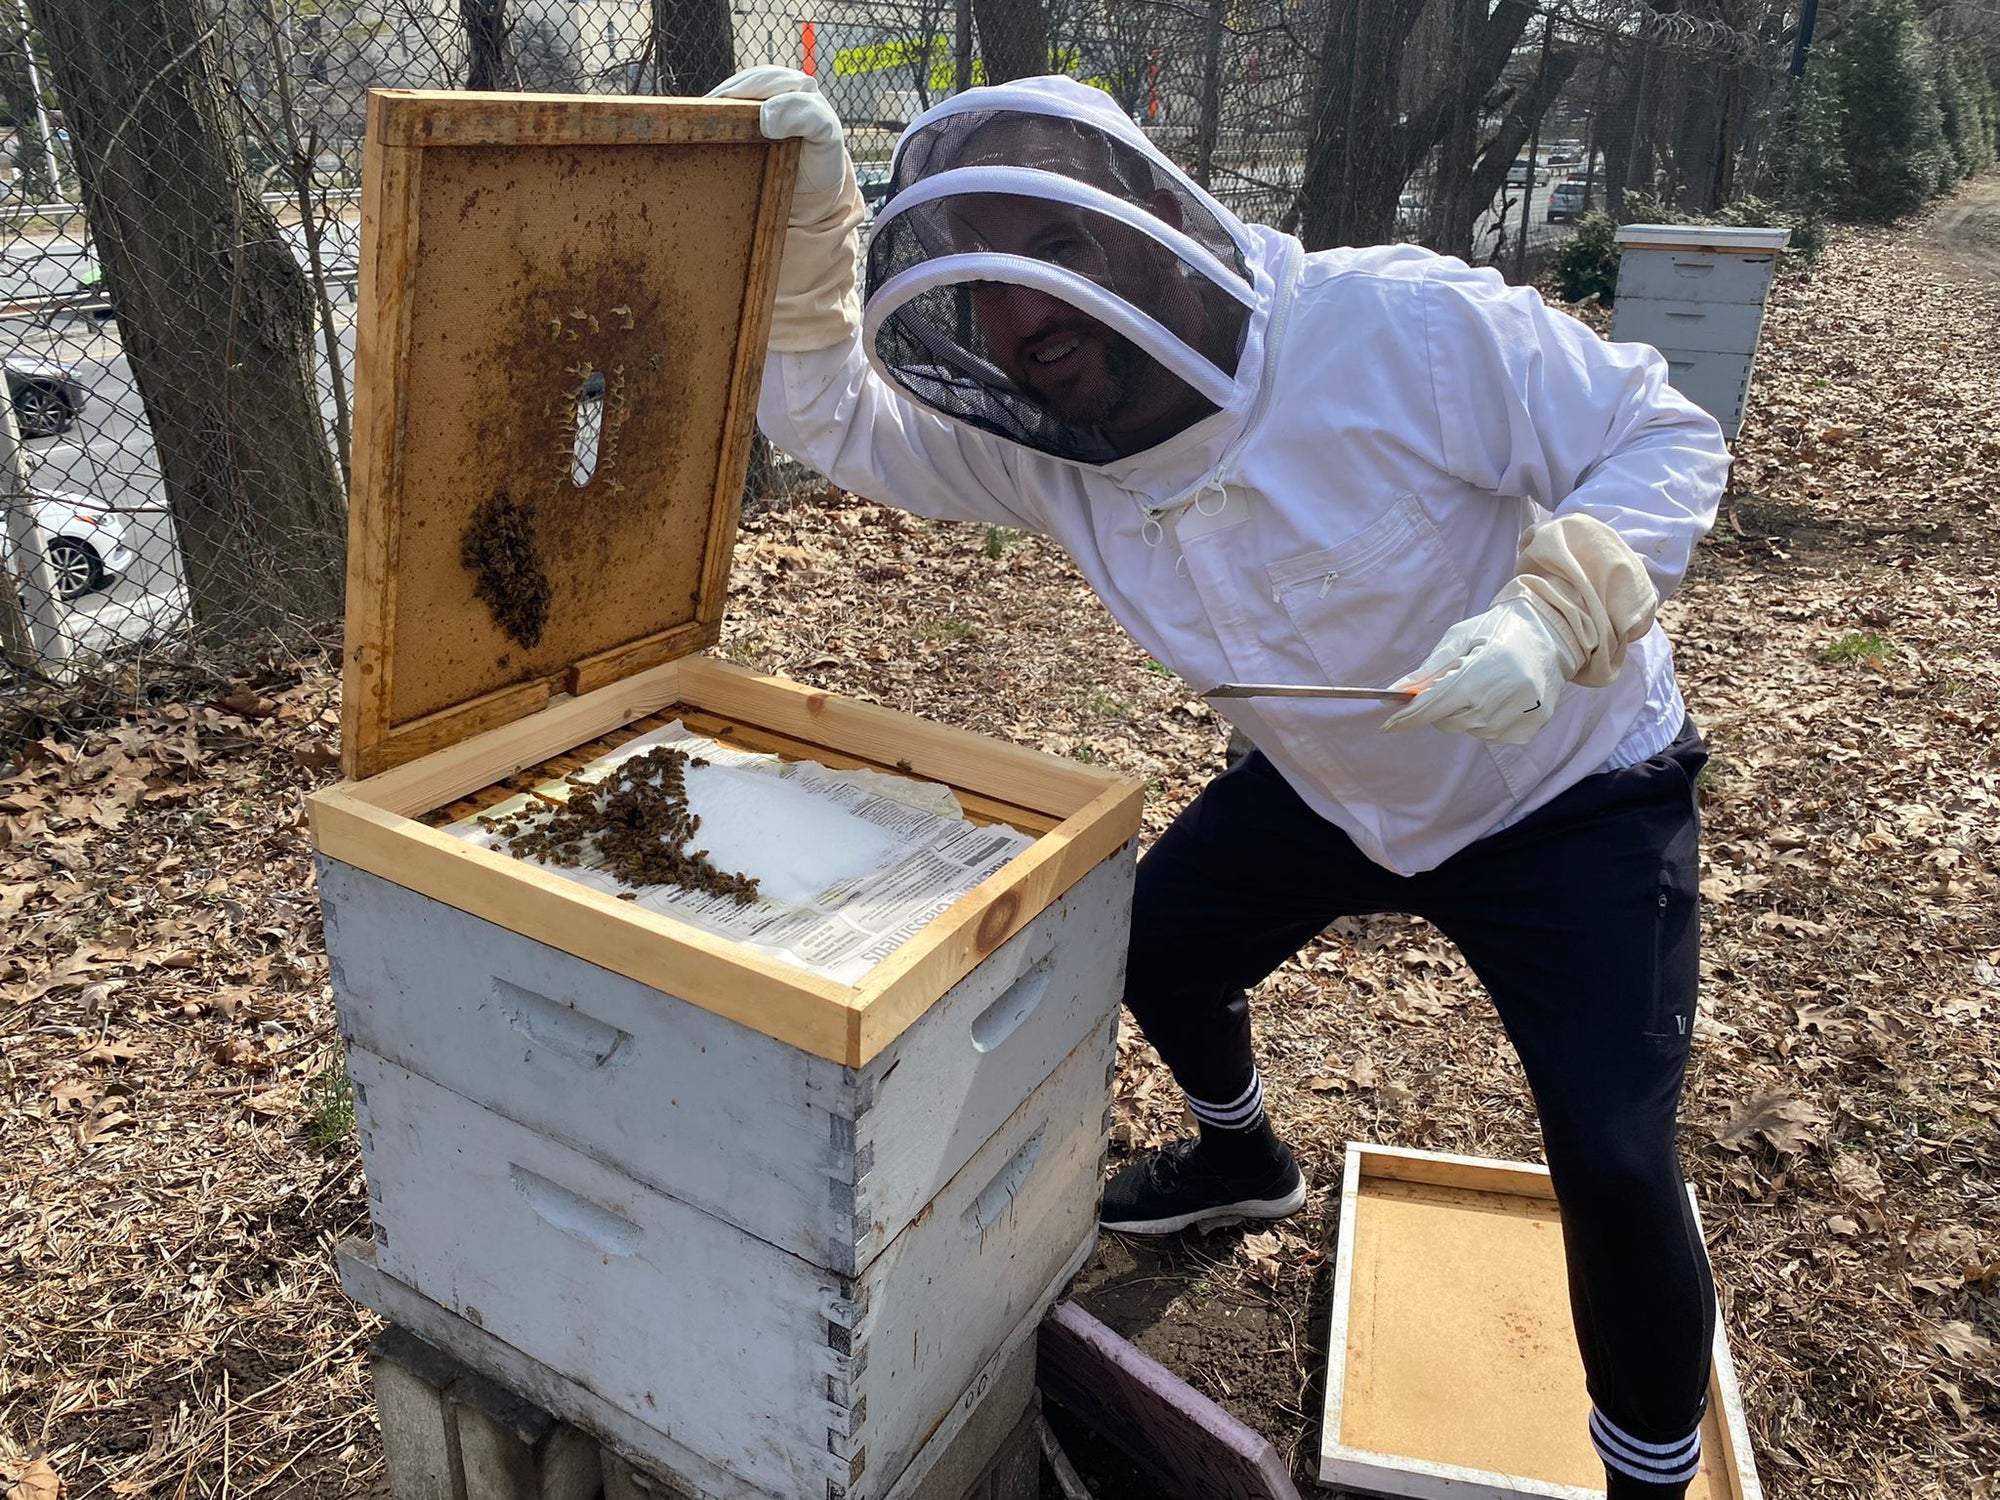 POTENT VENTRUES ESTABLISHES NEW PARTNERSHIP WITH NEW YORK BASED “THE BEE CONSERVANCY” TO ENACT ITS PURPOSE-DRIVEN KEYSTONE SPECIES STRATEGY FOR THE GUMMY PROJECT